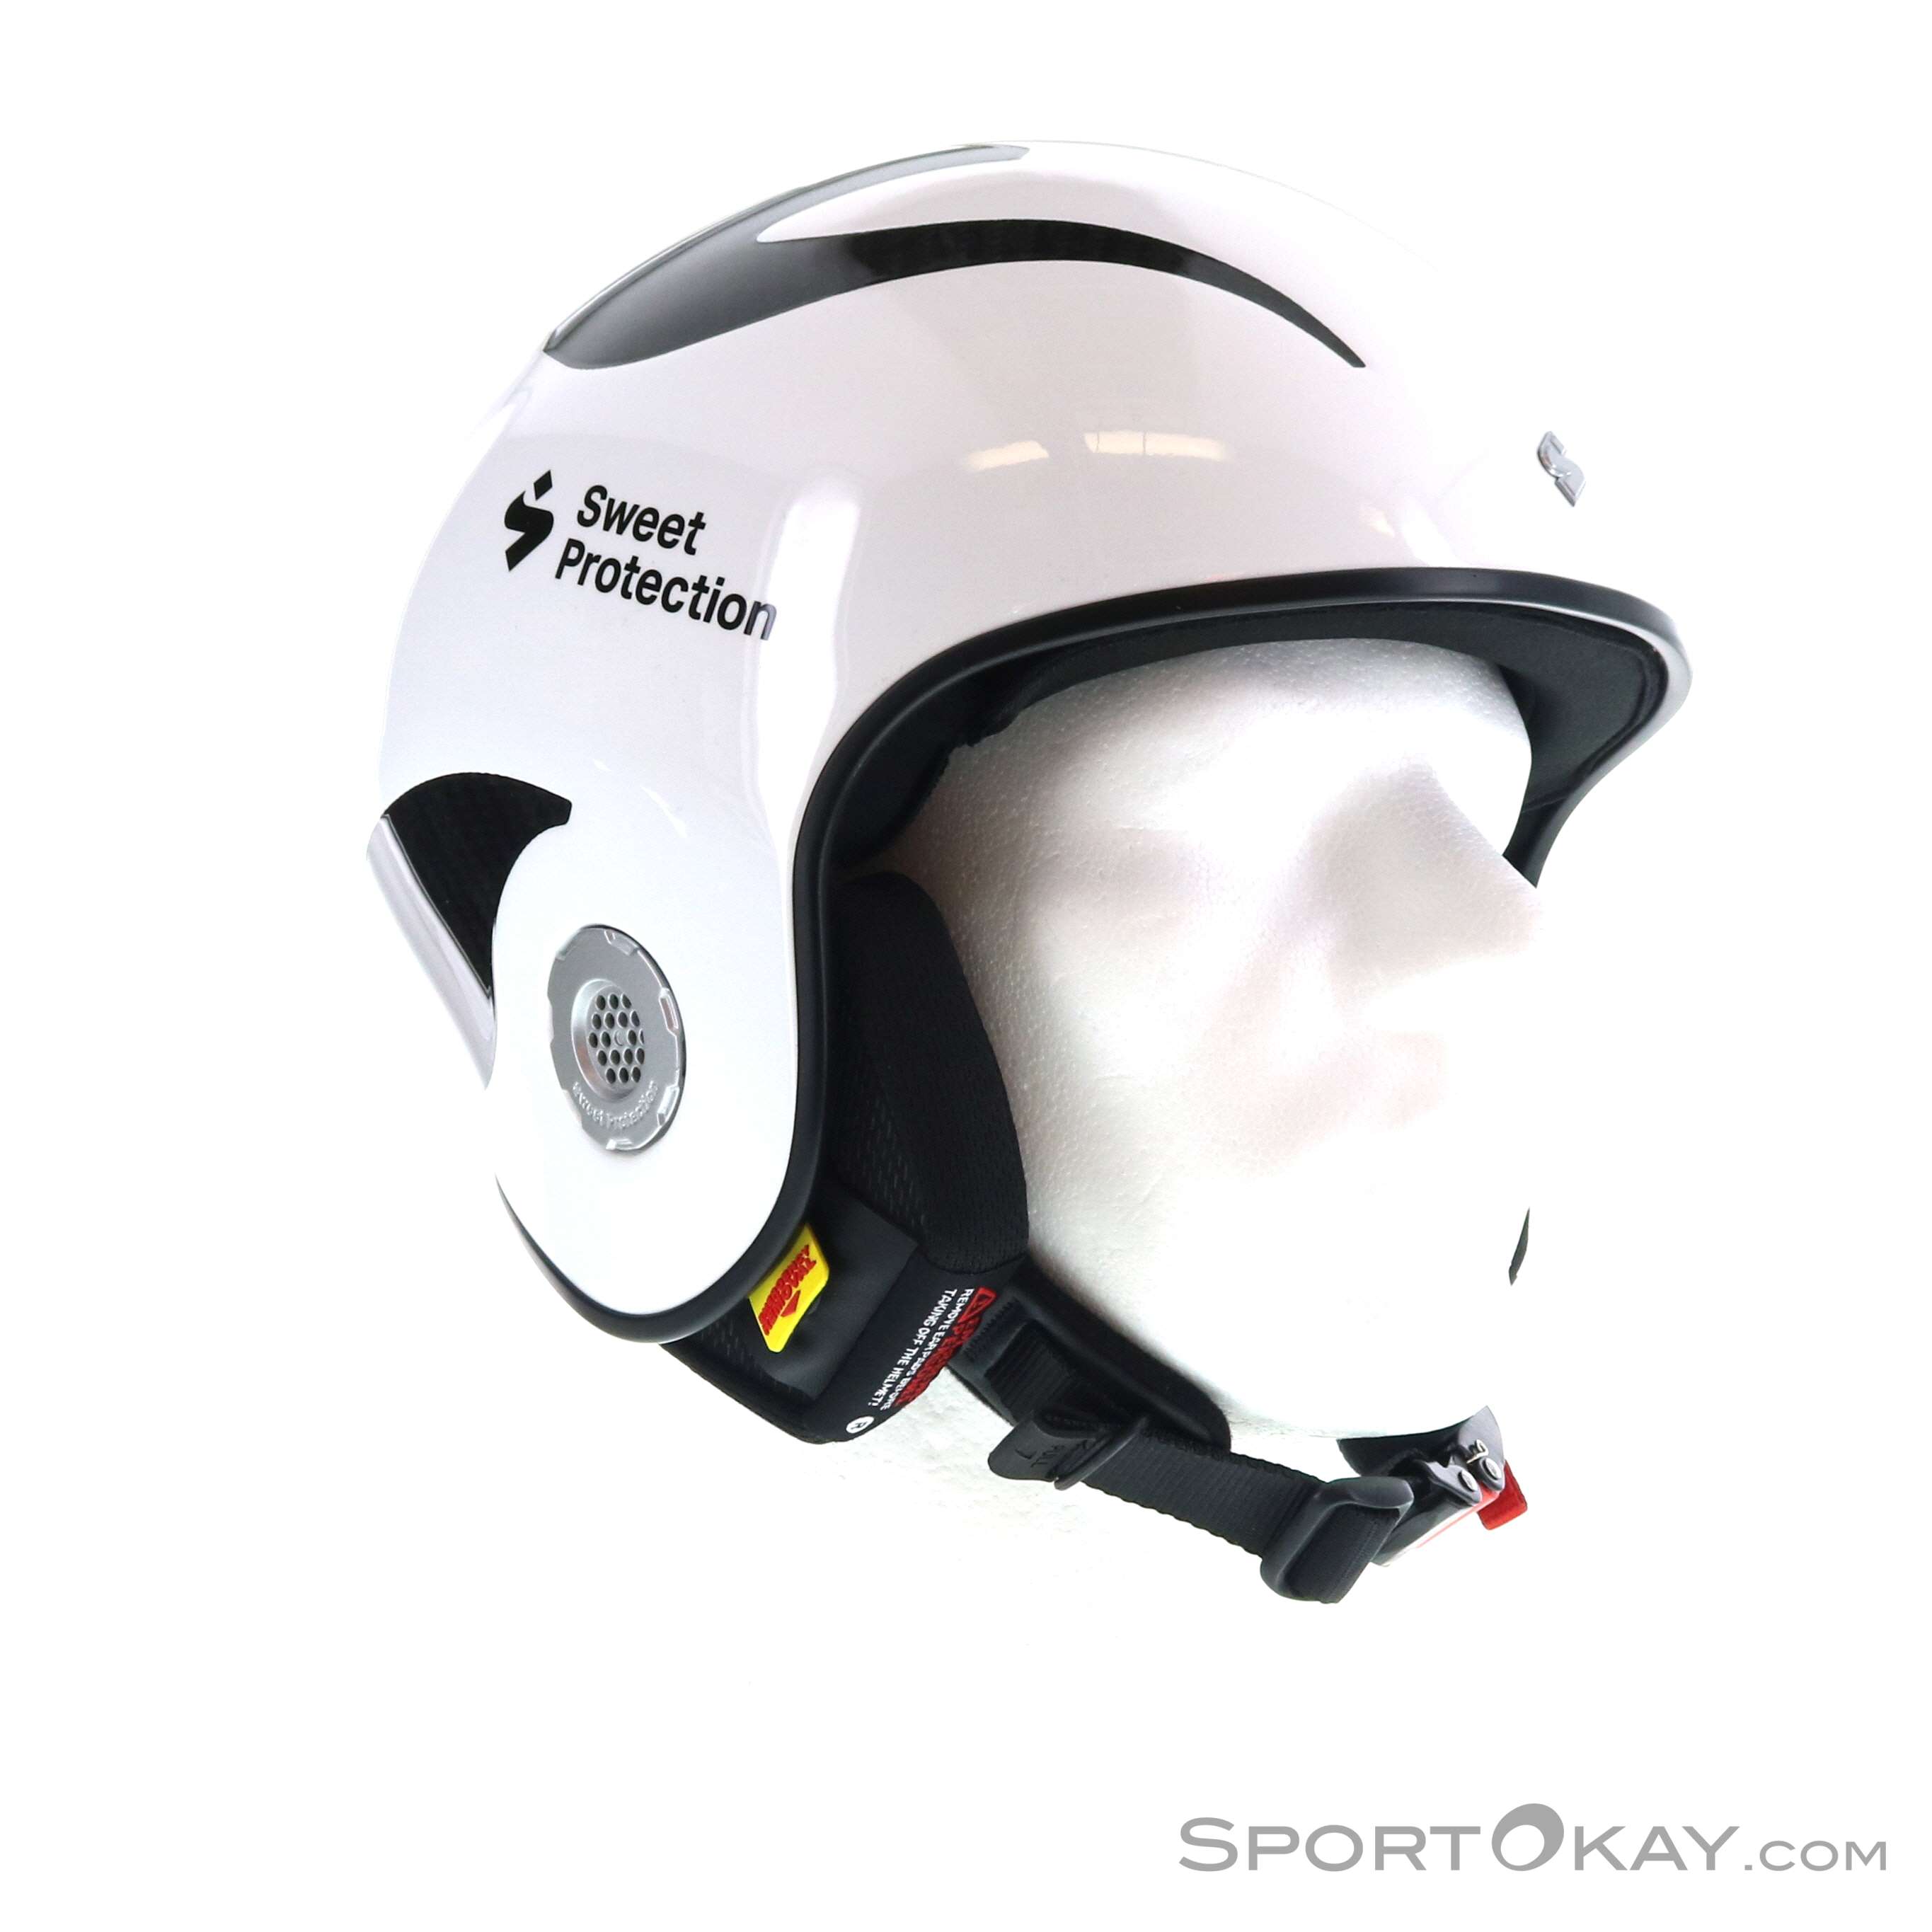 Sweet Protection Sweet Protection Volata WC Carbon MIPS Ski Helmet